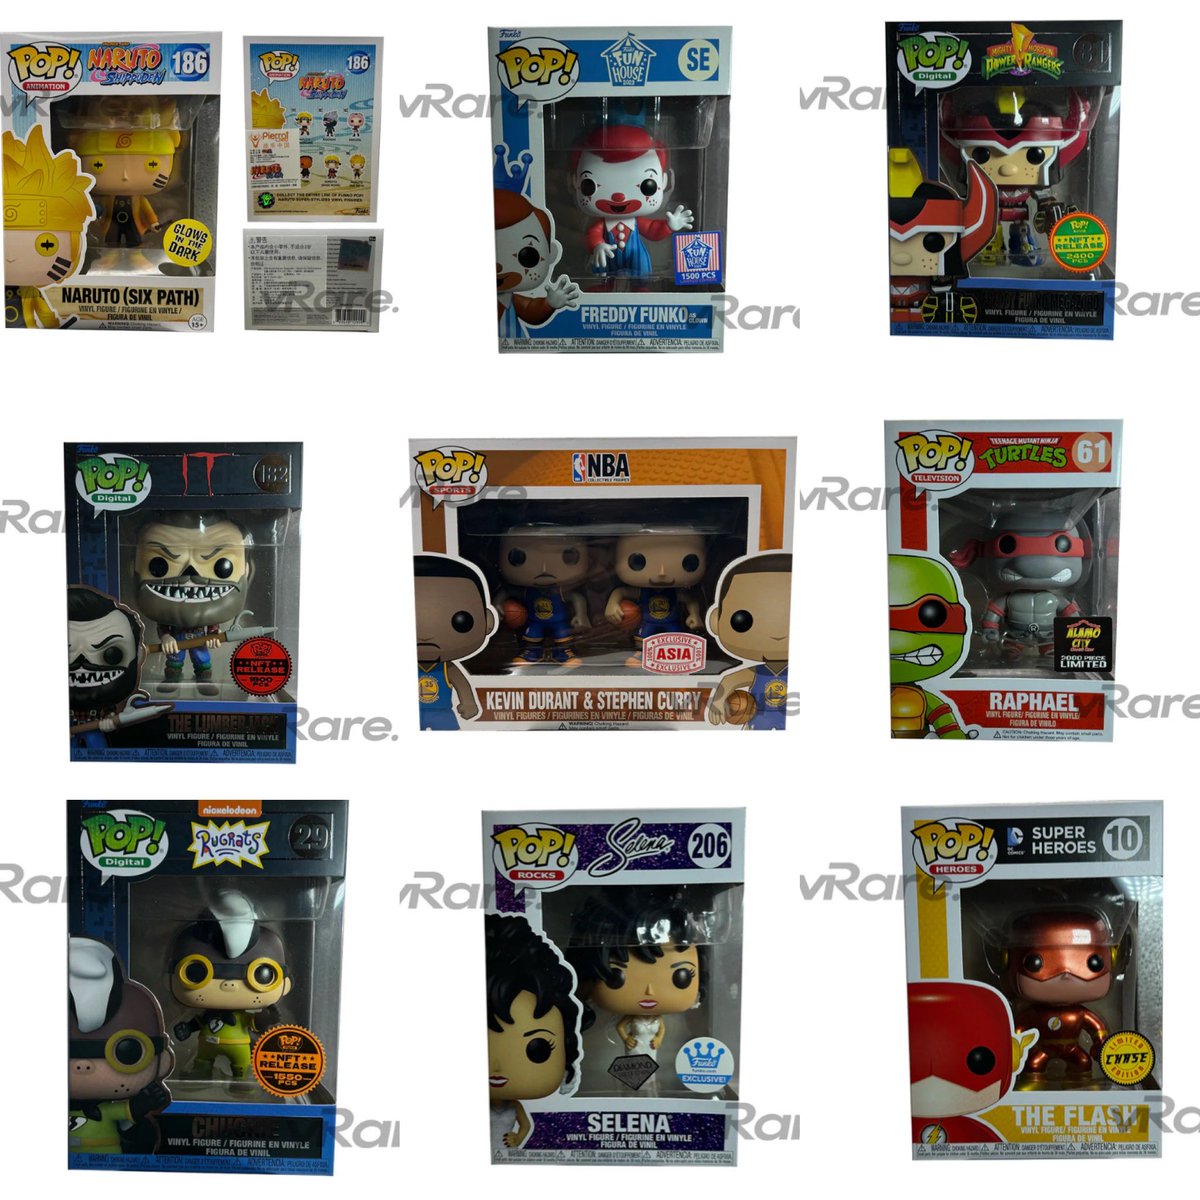 New additions to the vault now live below with vR! NFTs, older exclusives and more ~ Linky ~ bit.ly/3vXxGrg #Ad #FPN #FunkoPOPNews #Funko #POP #POPVinyl #FunkoPOP #FunkoSoda